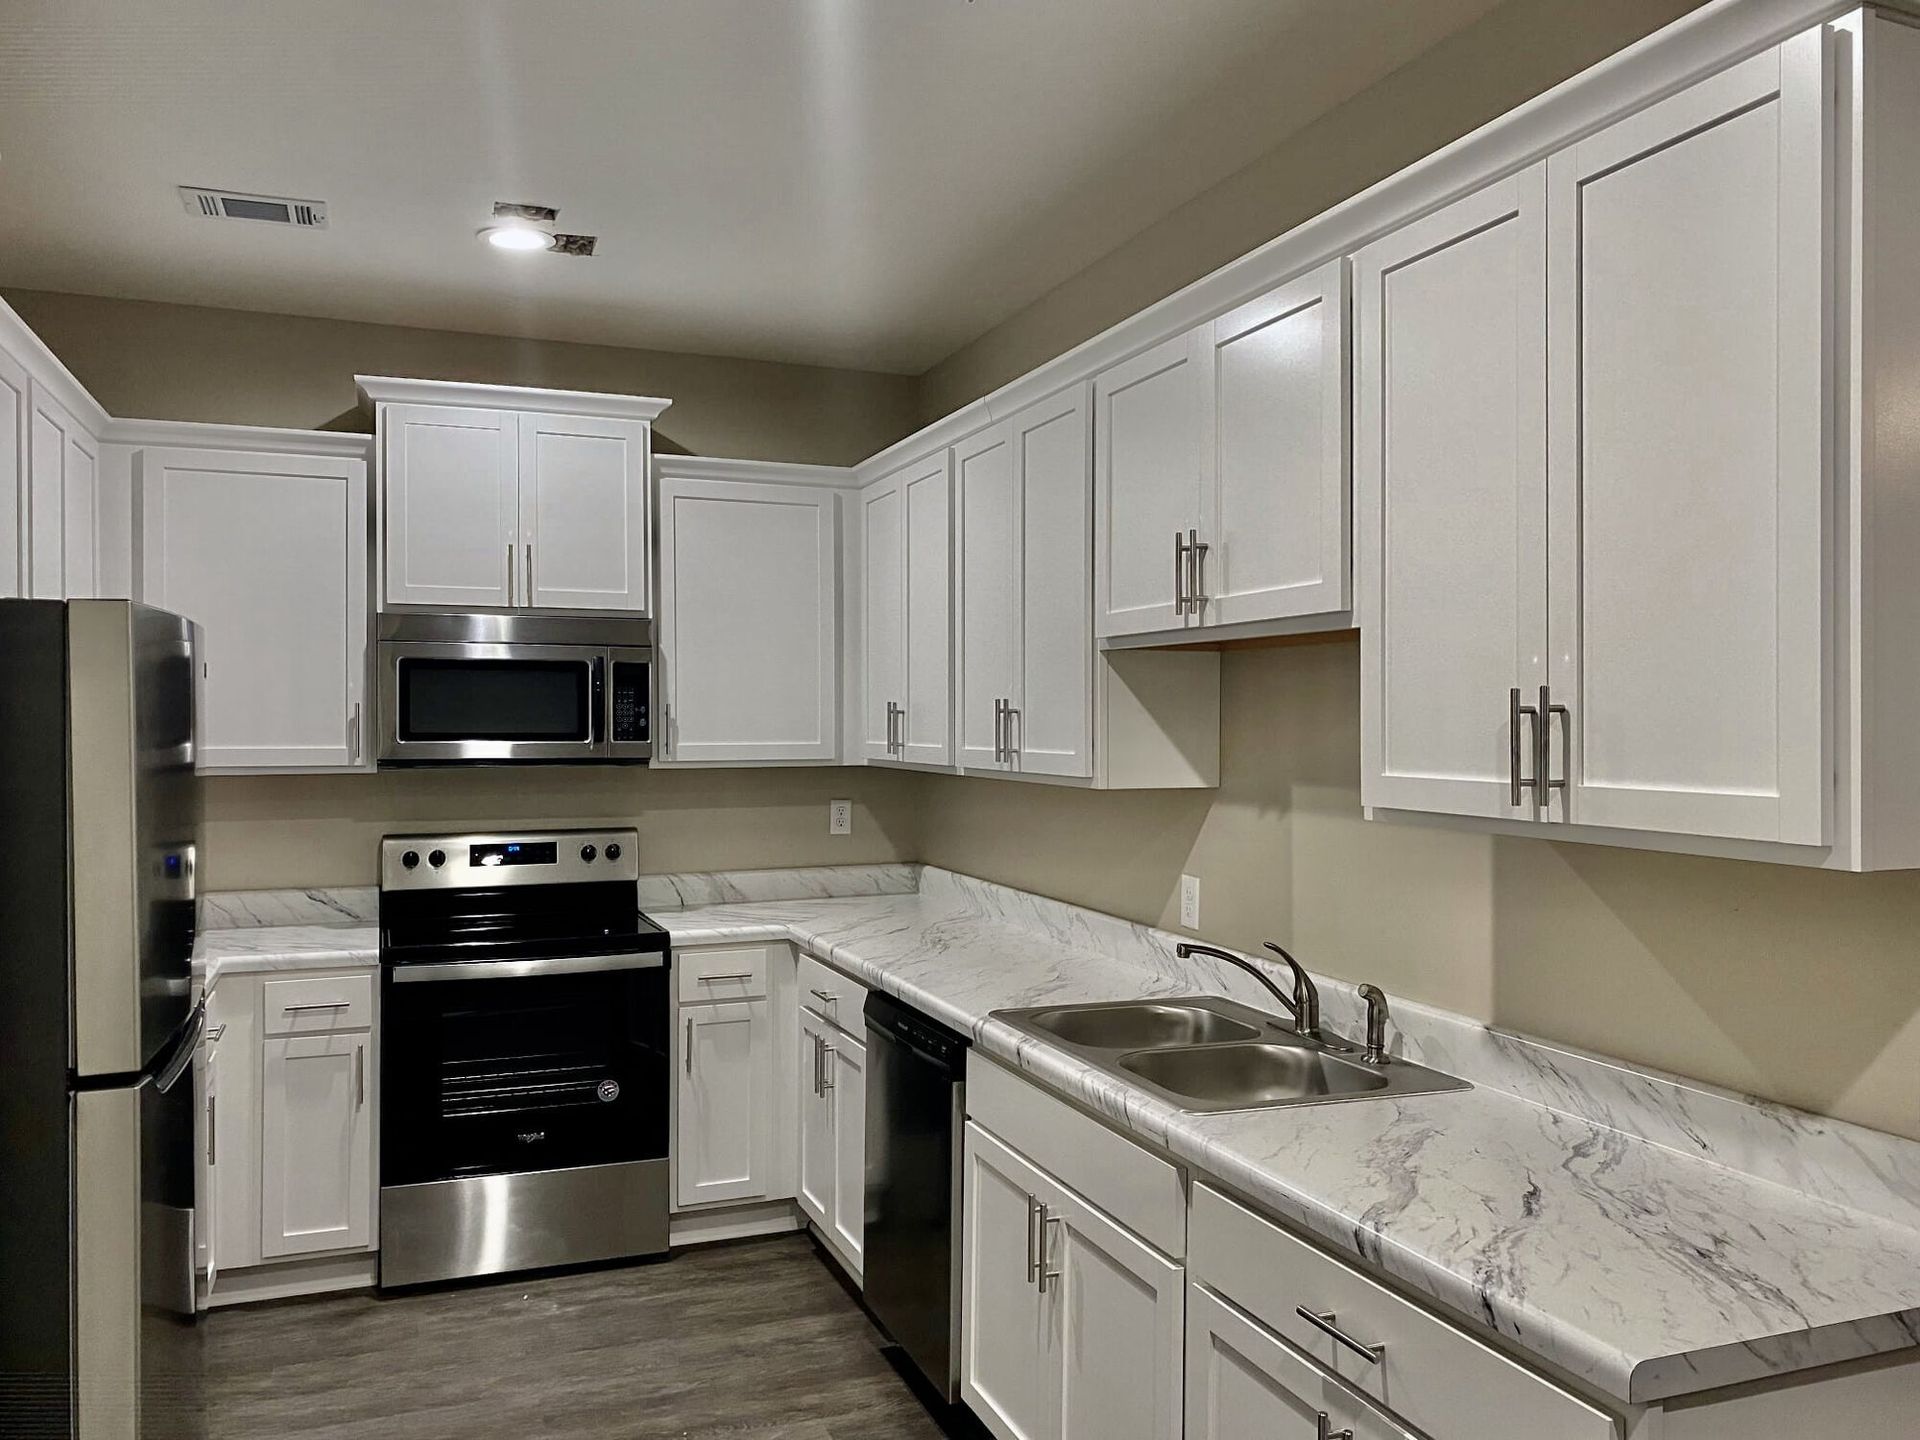 A kitchen with white cabinets and stainless steel appliancesat Patriots Place.